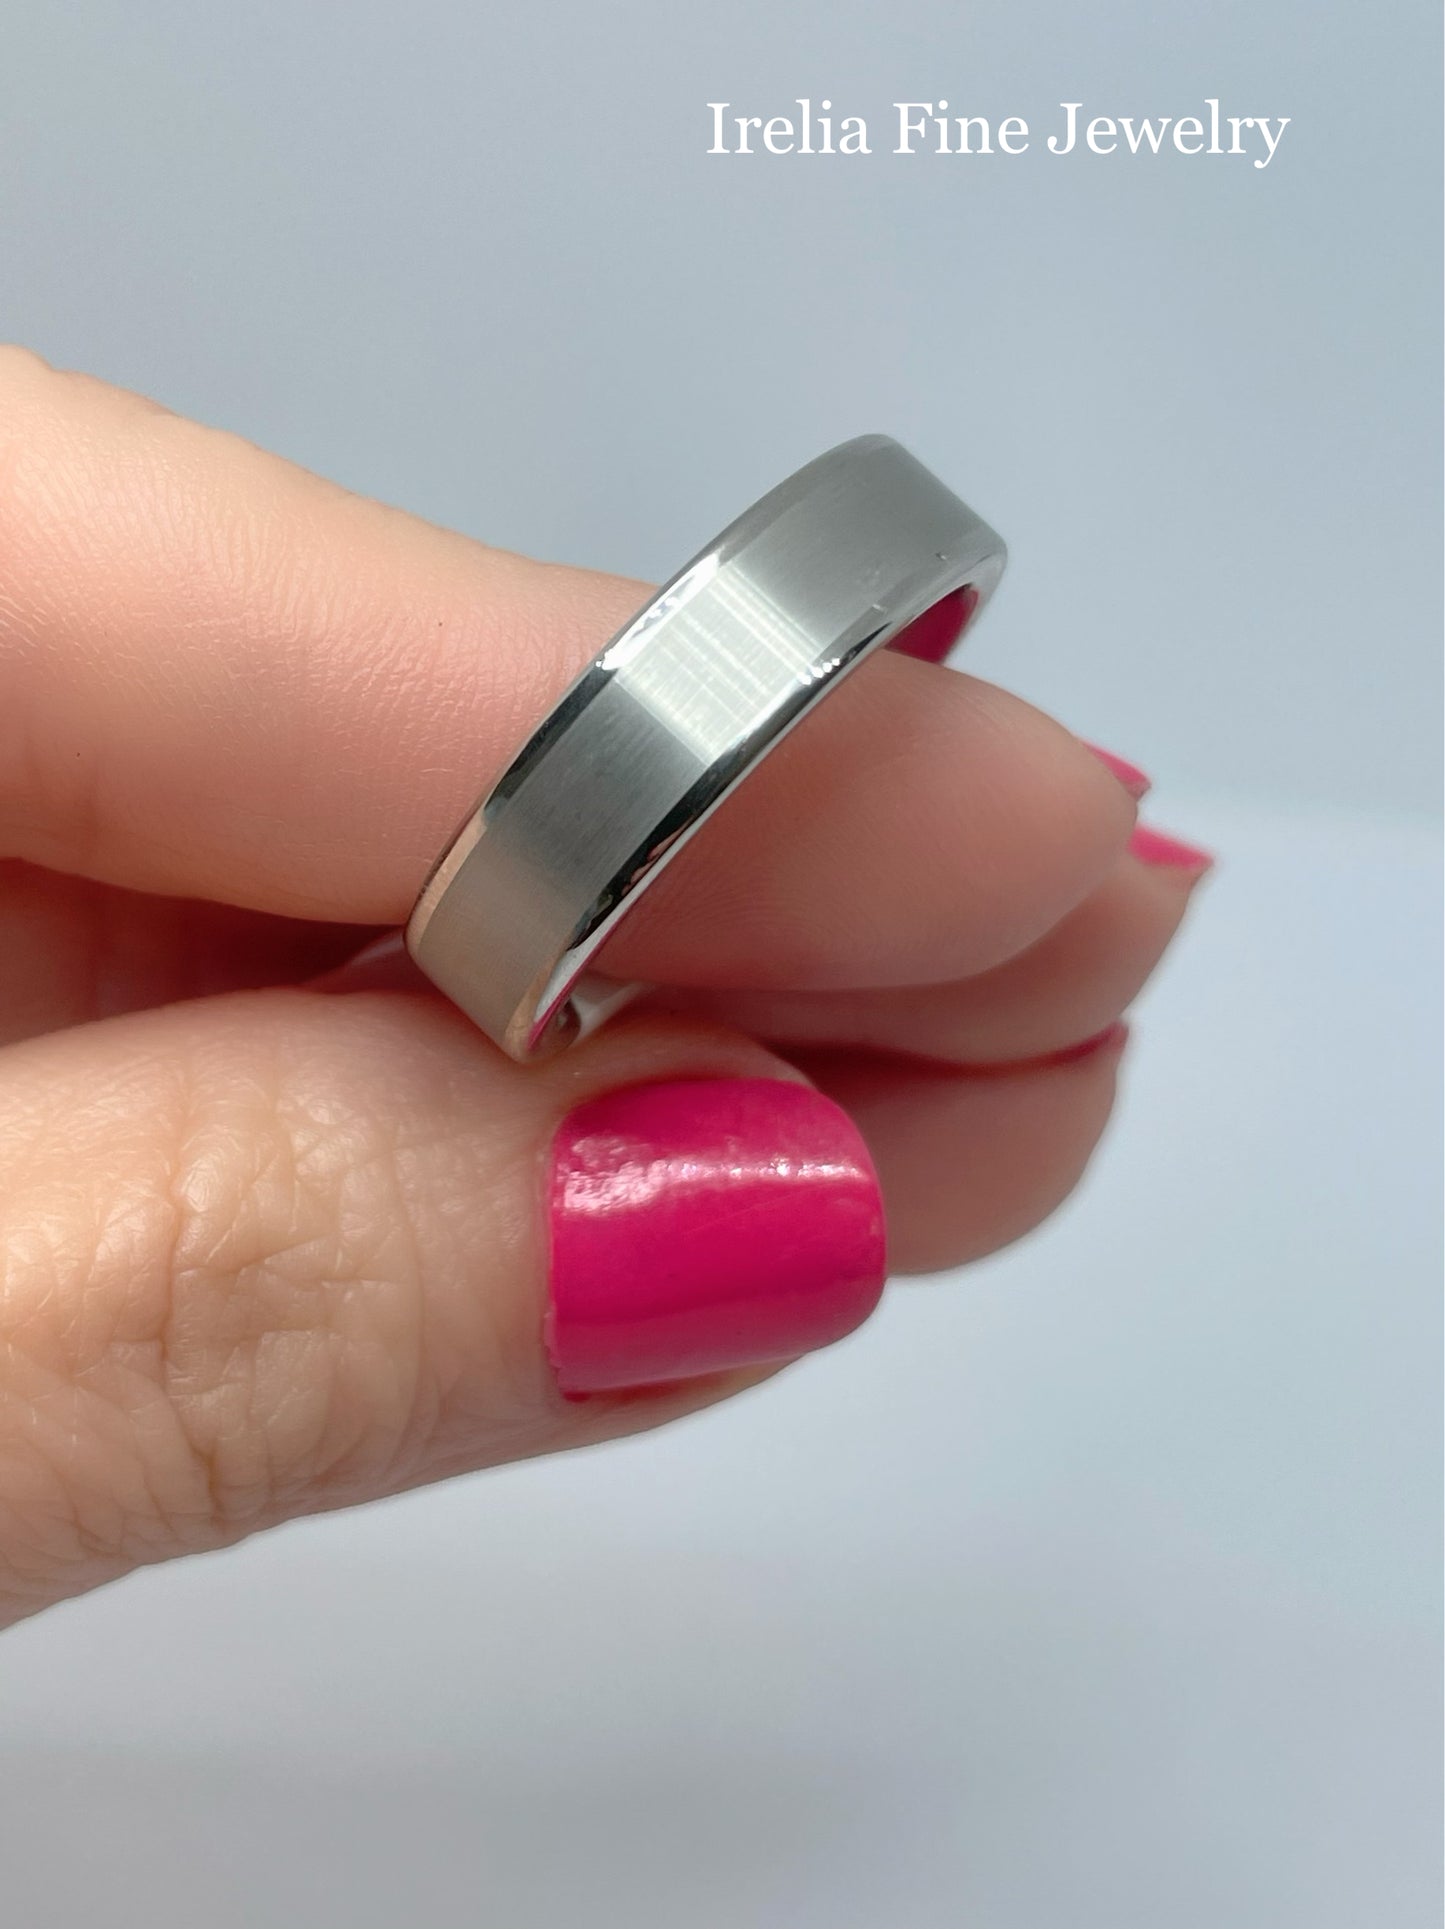 6MM Tungsten Carbide Ring - Satin Finish and Round Edge - Size 10